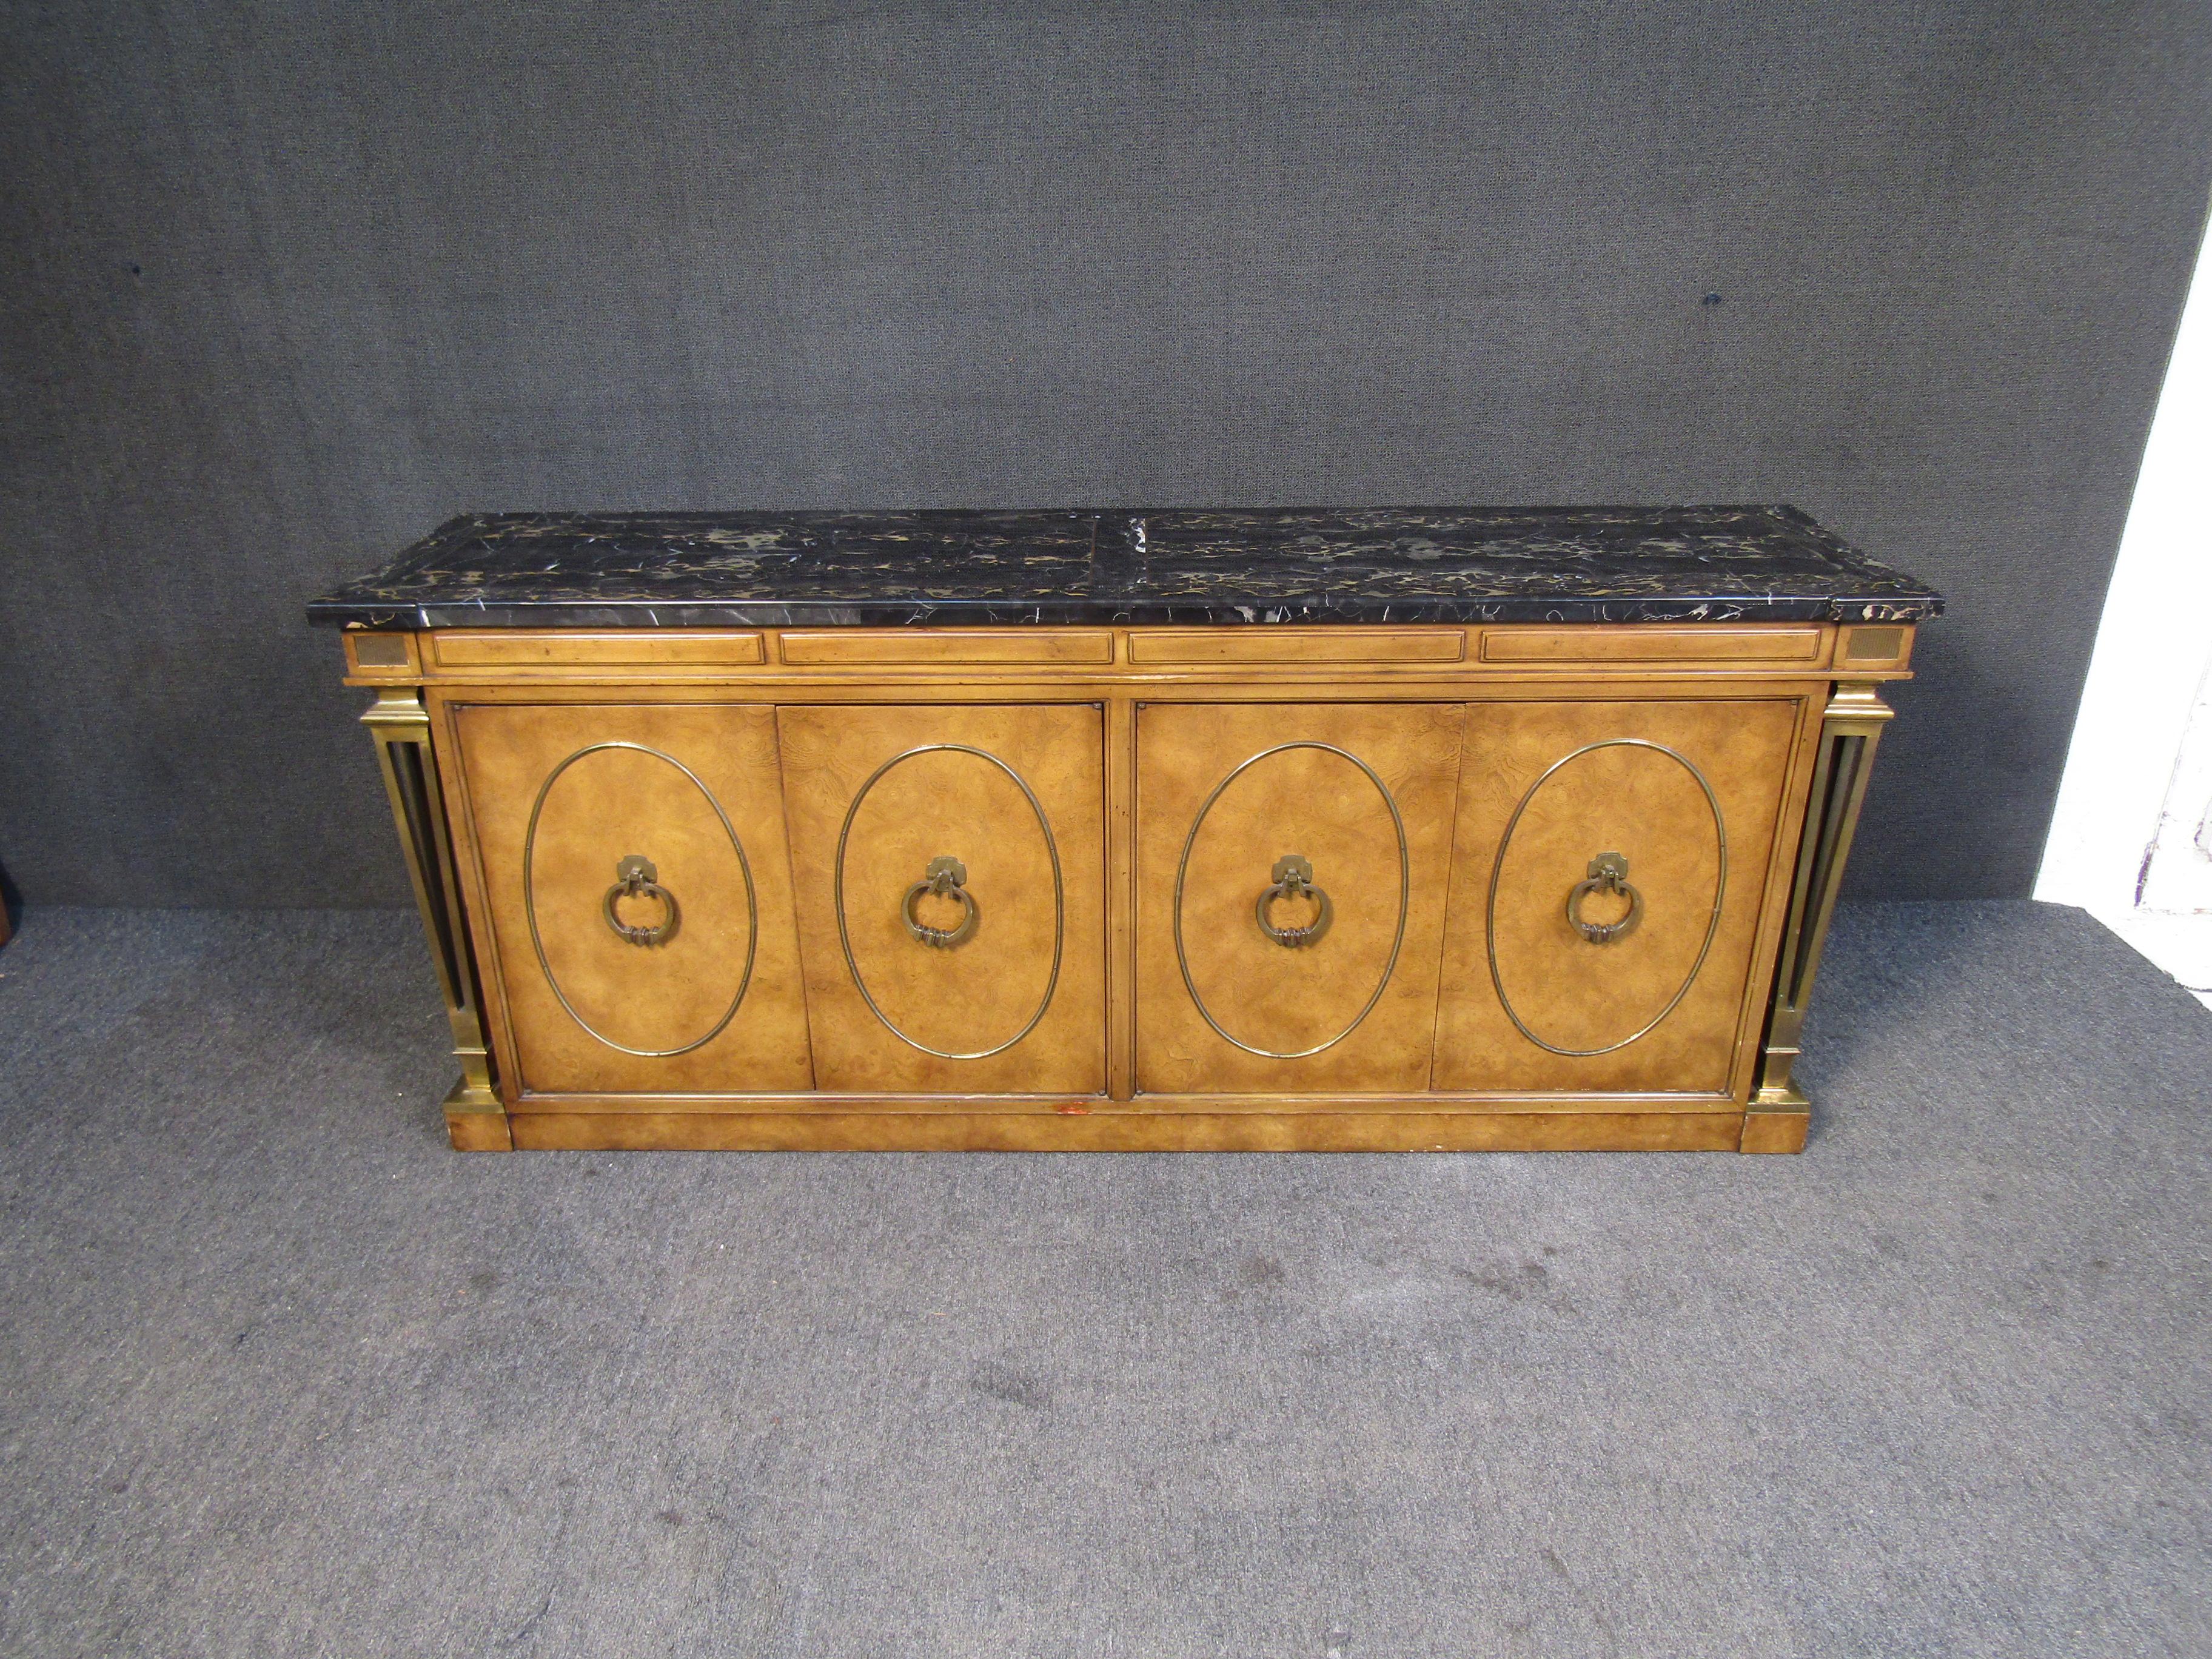 This vintage credenza by Mastercraft is an impressive piece of Mid-Century design. With radiant burl woodgrain, brass accents, a dark marble top, and elaborate details throughout, this credenza offers plenty of storage with a truly unique look.